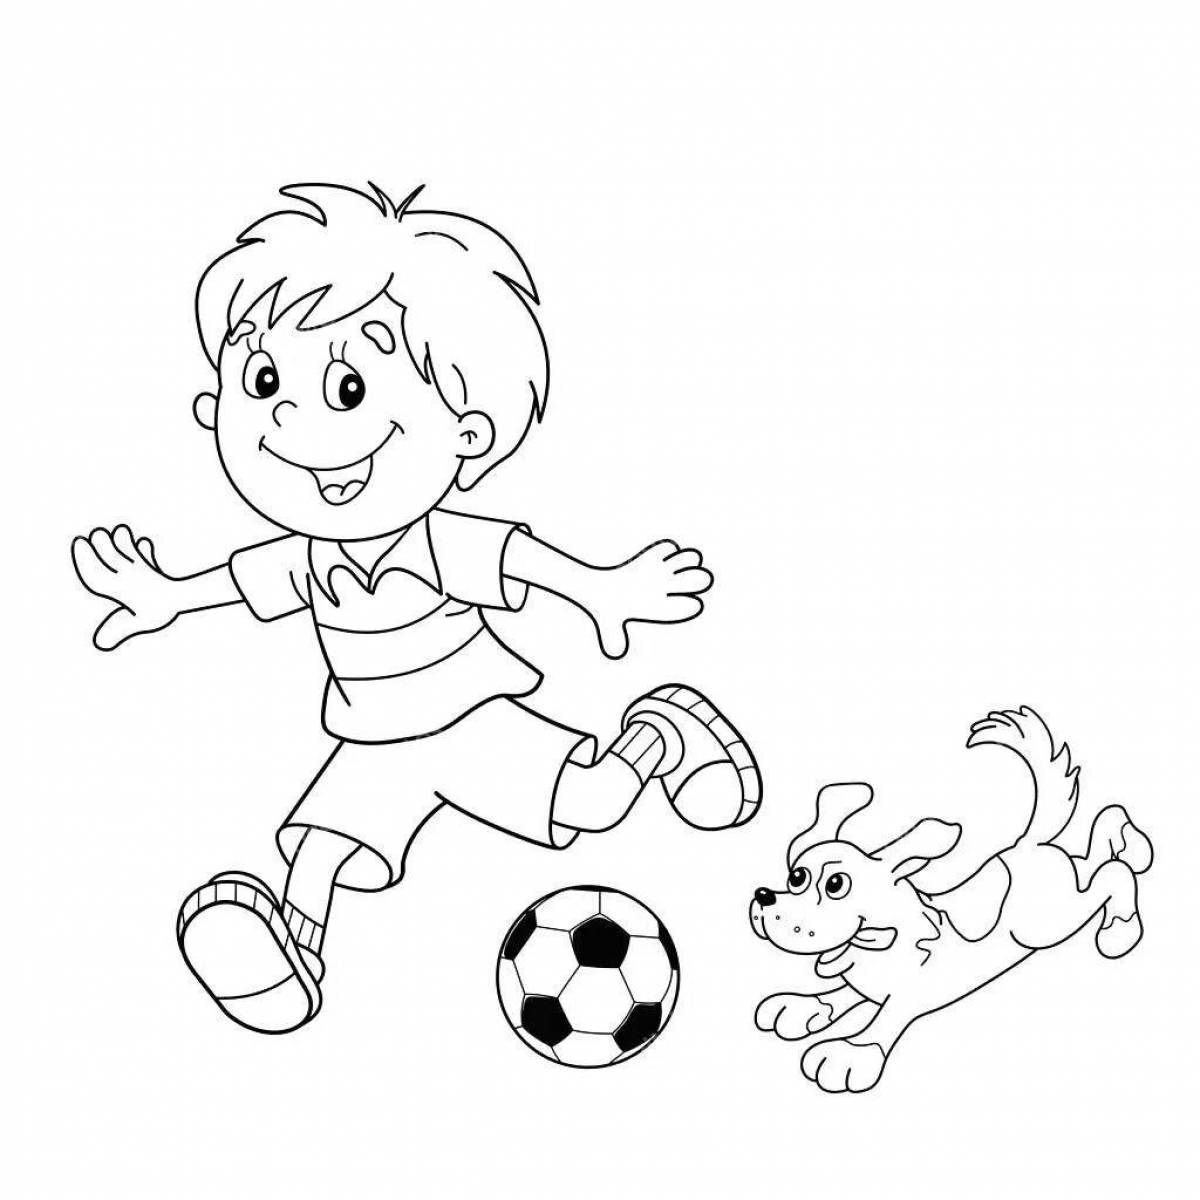 Coloring page energetic boy playing football